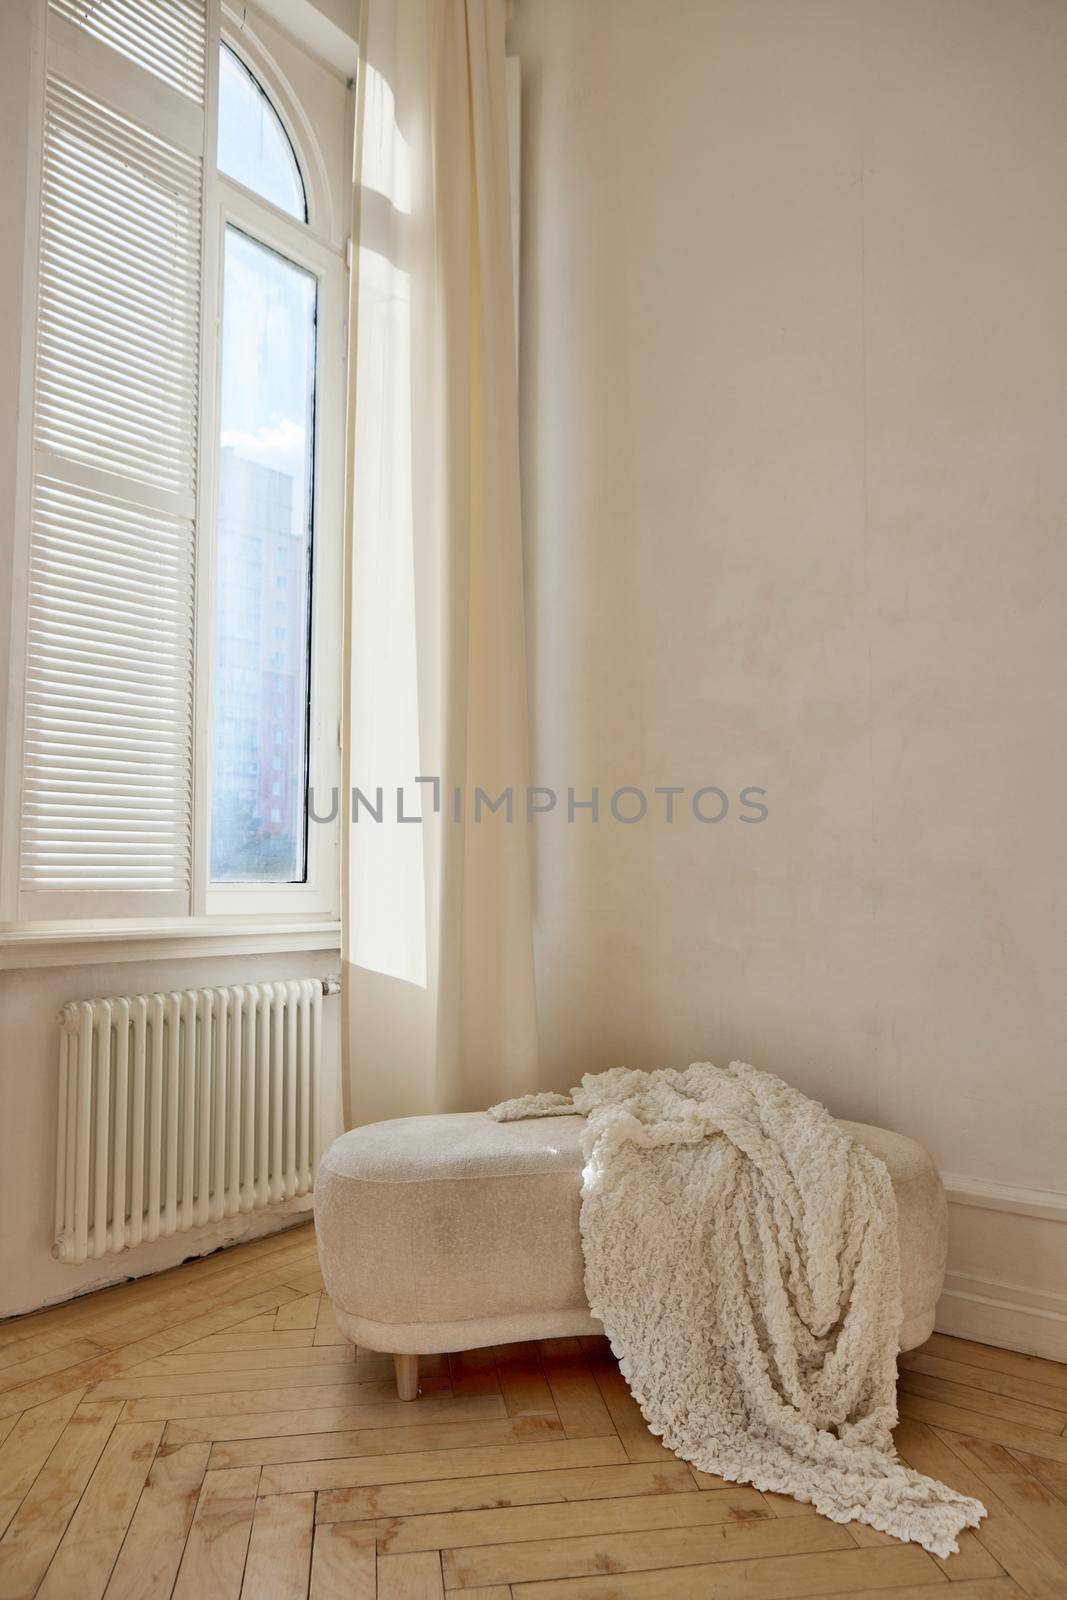 Comfortable ottoman with soft white coverlet placed near window and radiator in light room